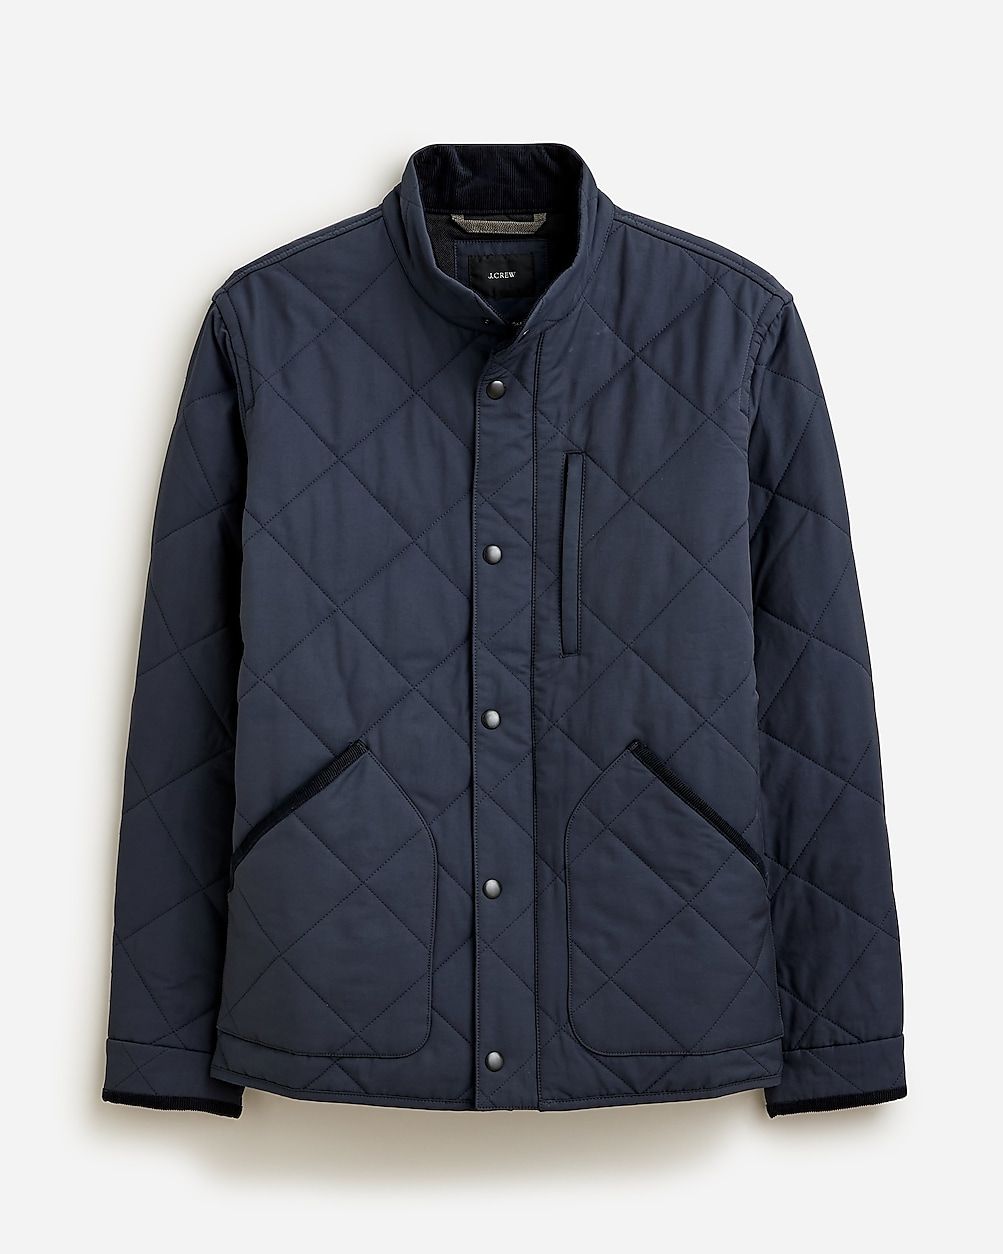 Sussex quilted jacket | J.Crew US